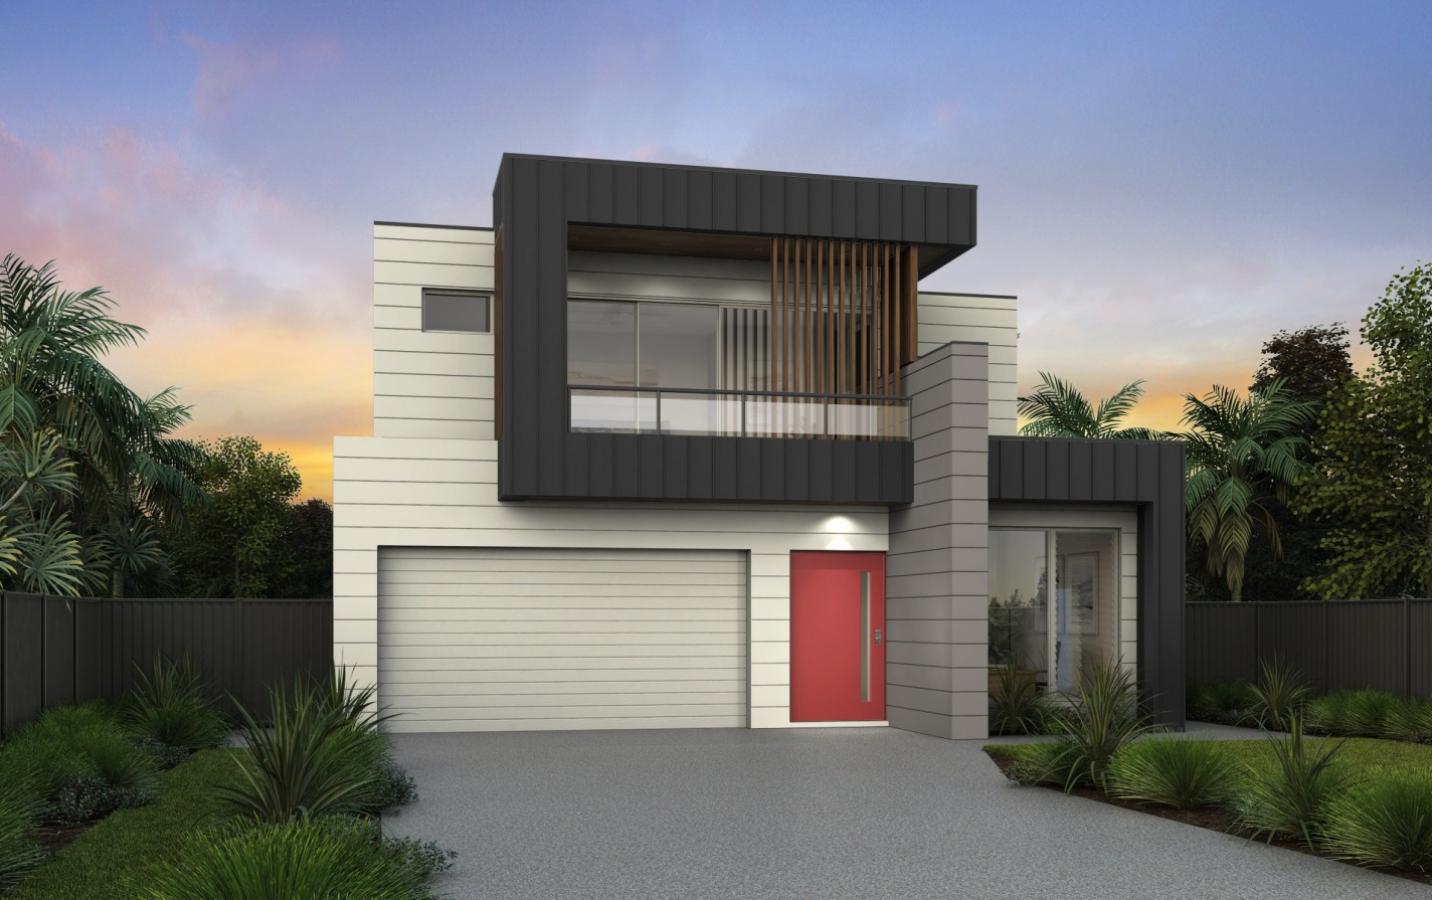 COLORBOND® steel Visualiser.  Podium. Typical of modern 2 storey homes designed to take advantage of narrow blocks this style allows you the freedom to add a variation of building materials.